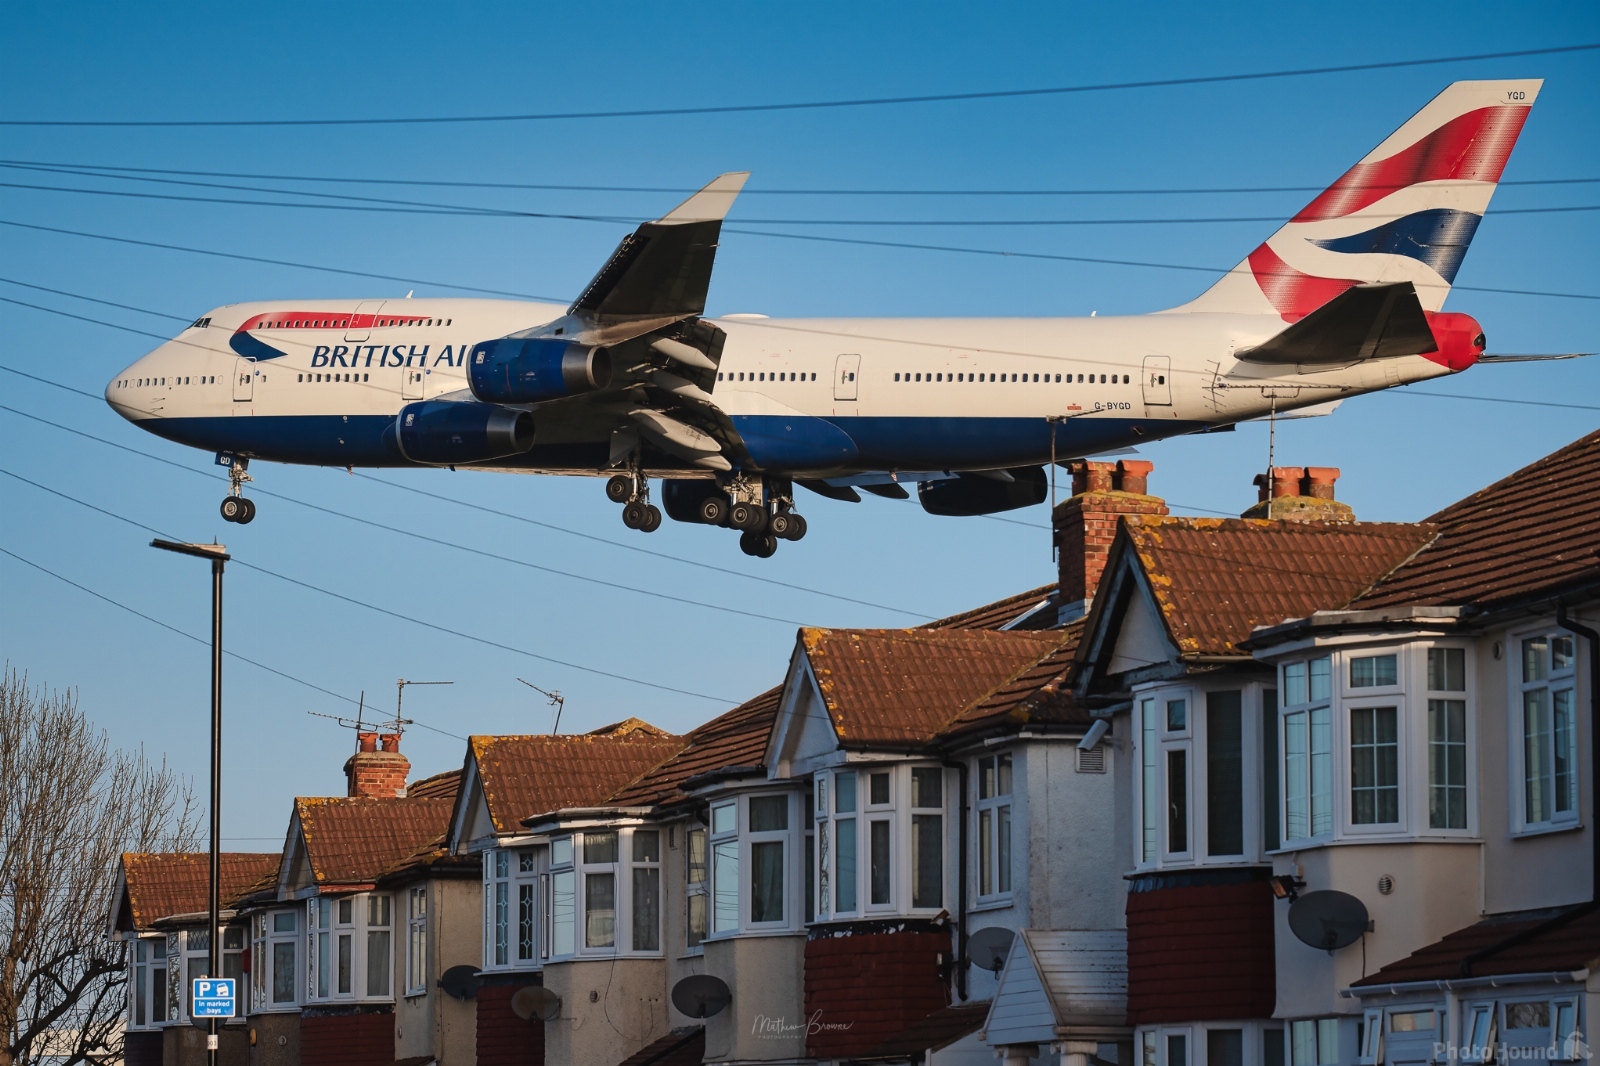 Image of Myrtle Avenue Planespotting by Mathew Browne